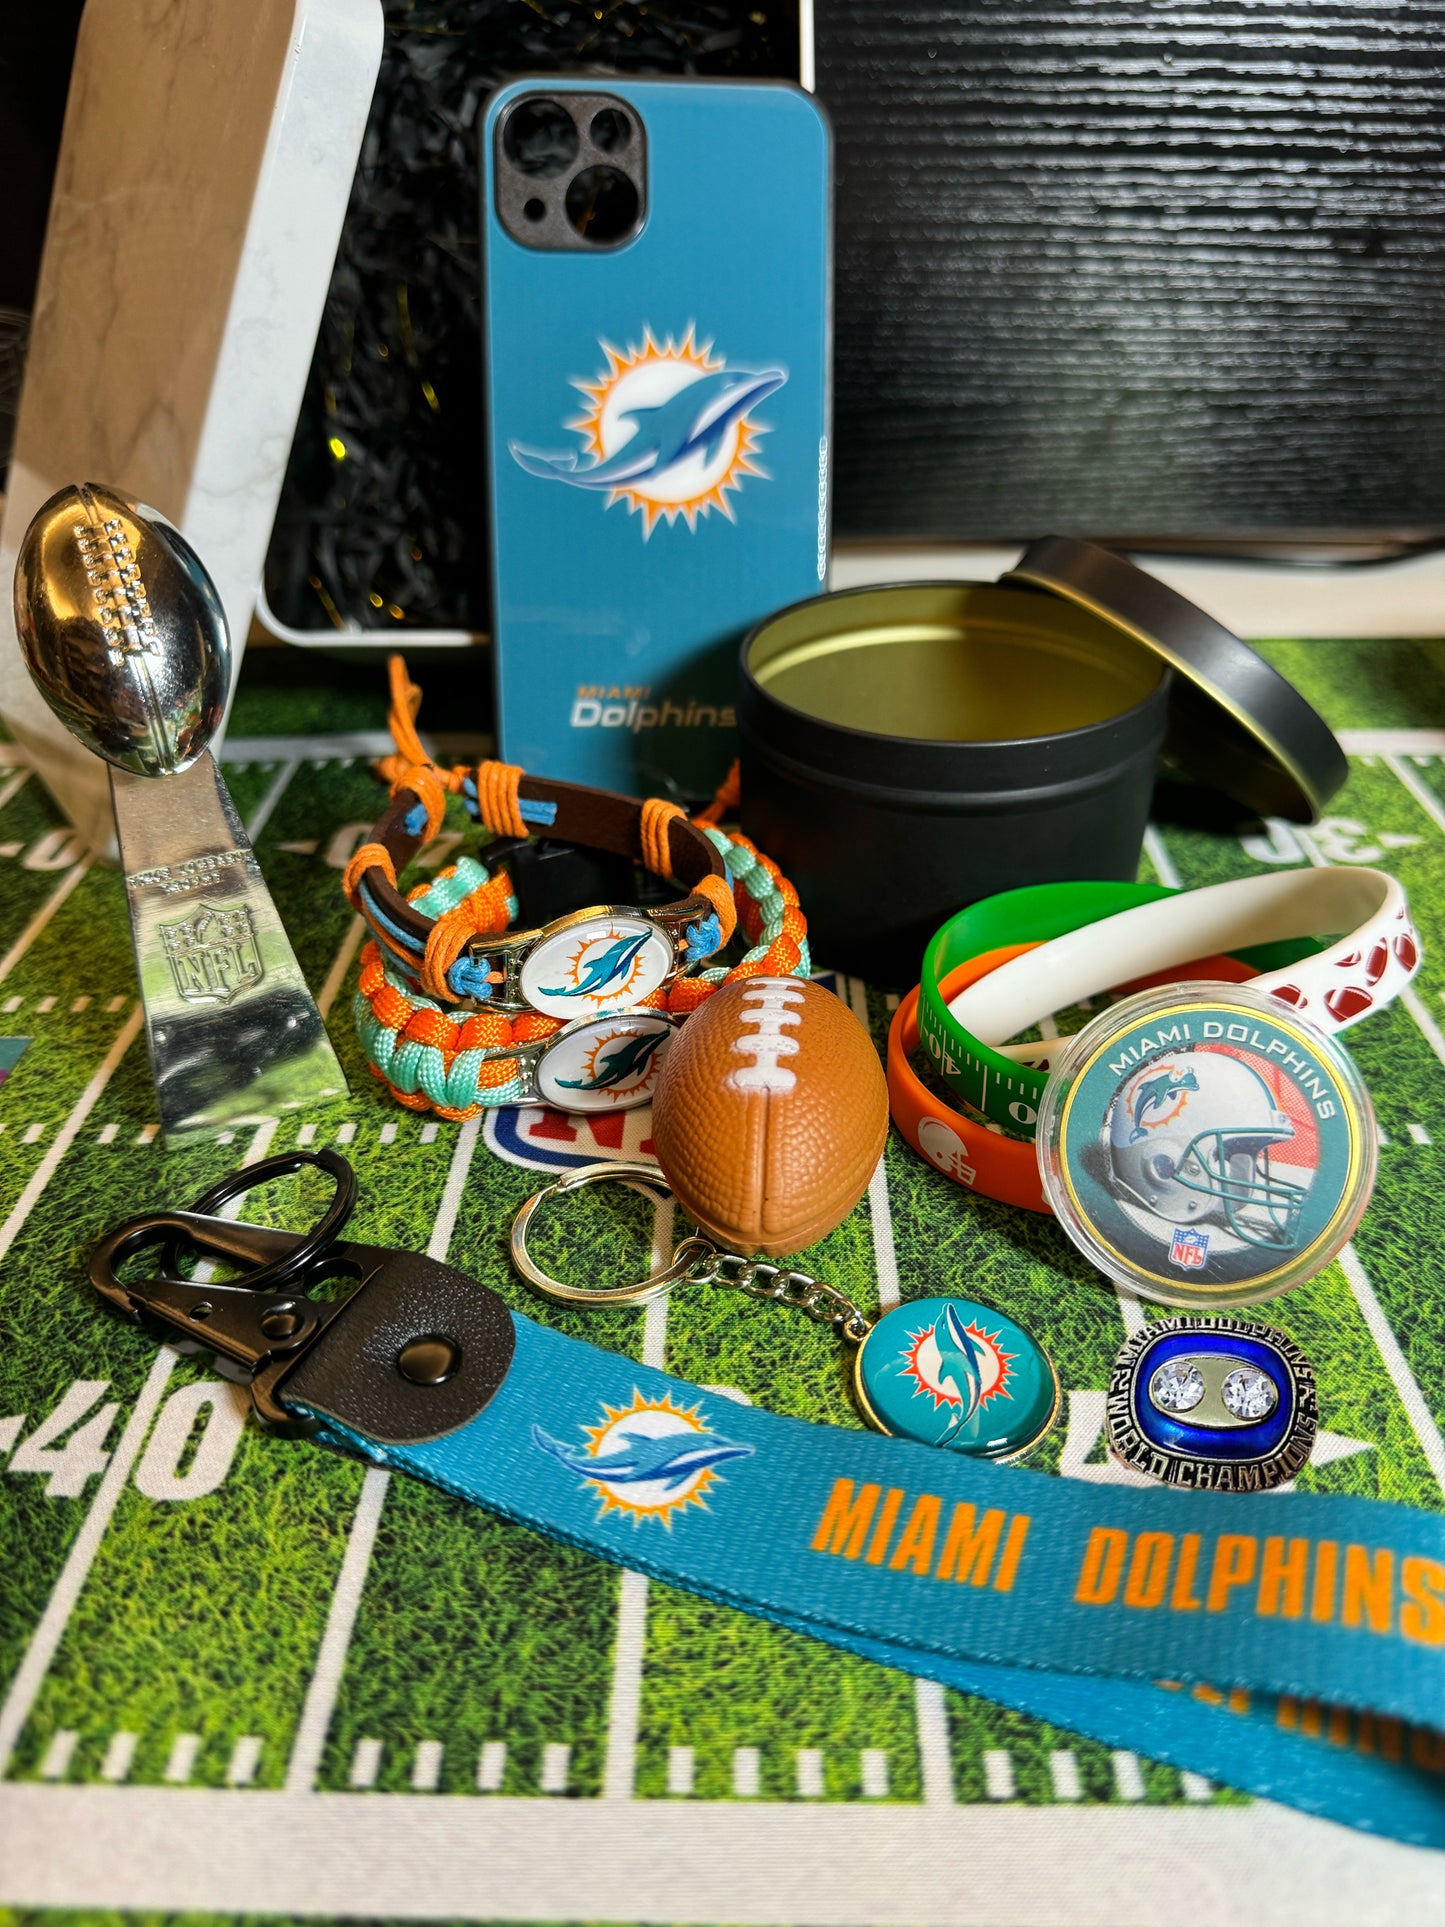 Dolphins Gift Box（10% off your order！！！）